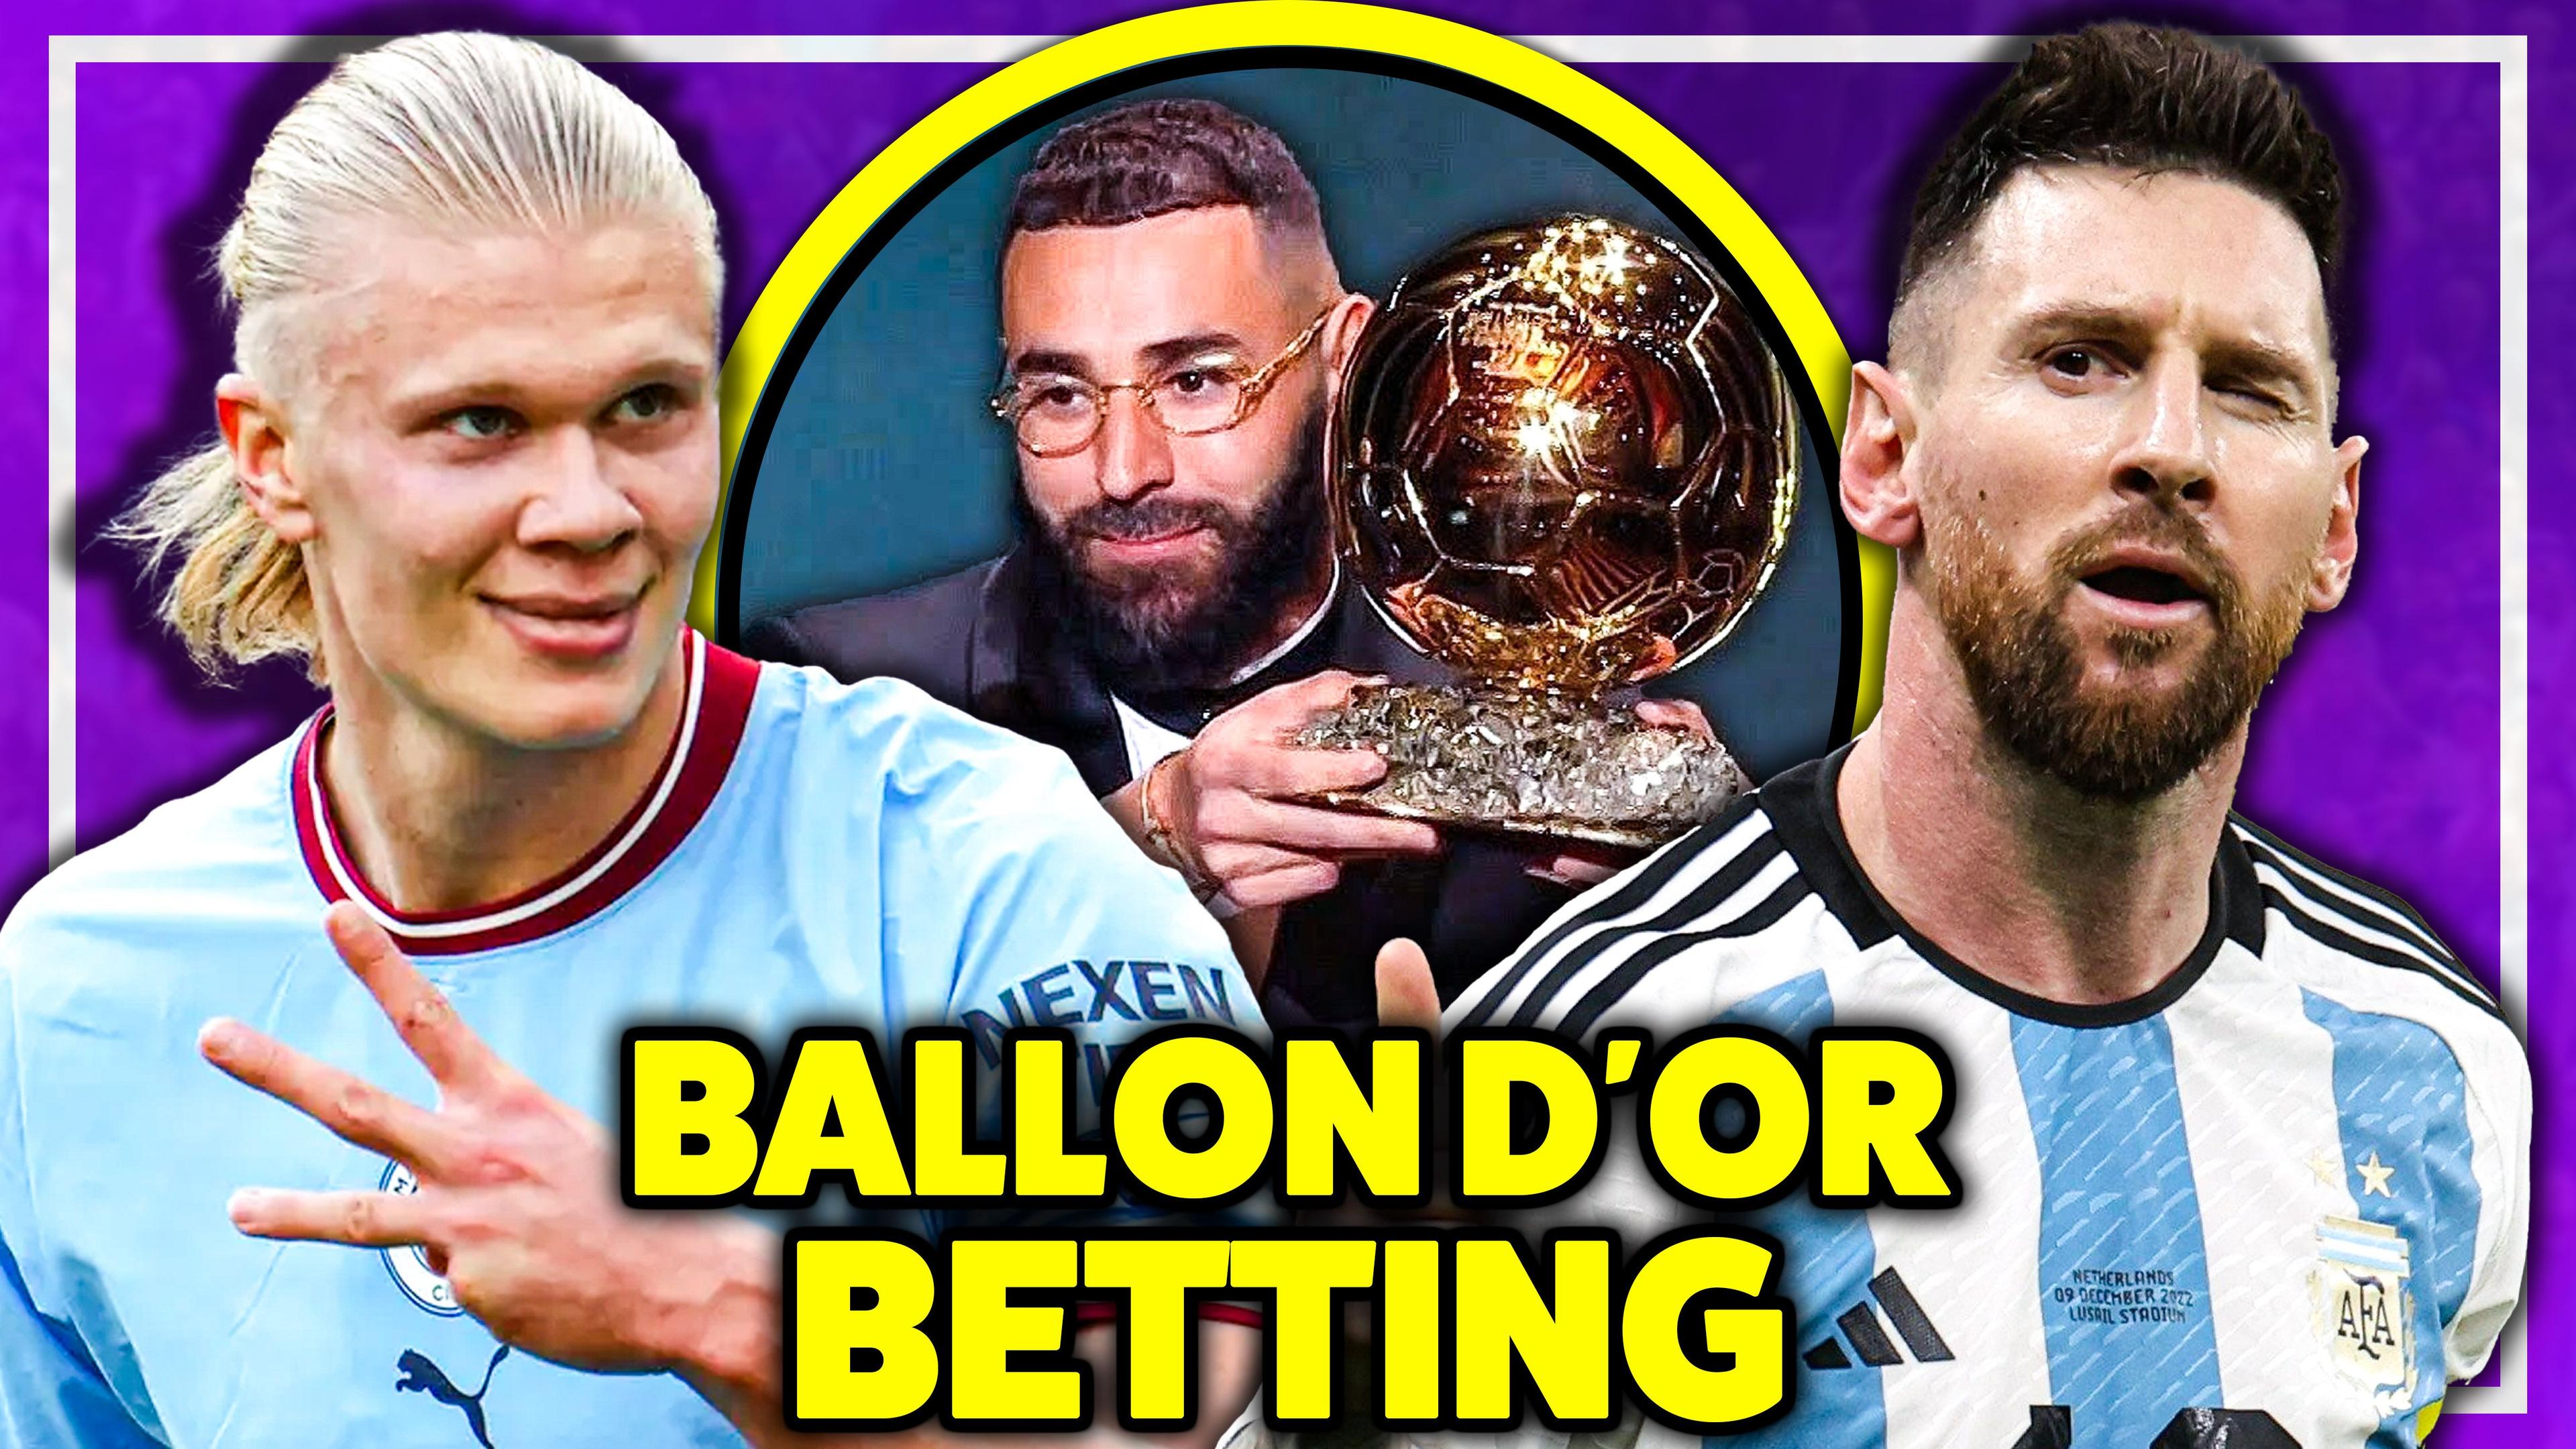 The Ballon D'or Betting Market Is INSANE Halland or Messi.jpg